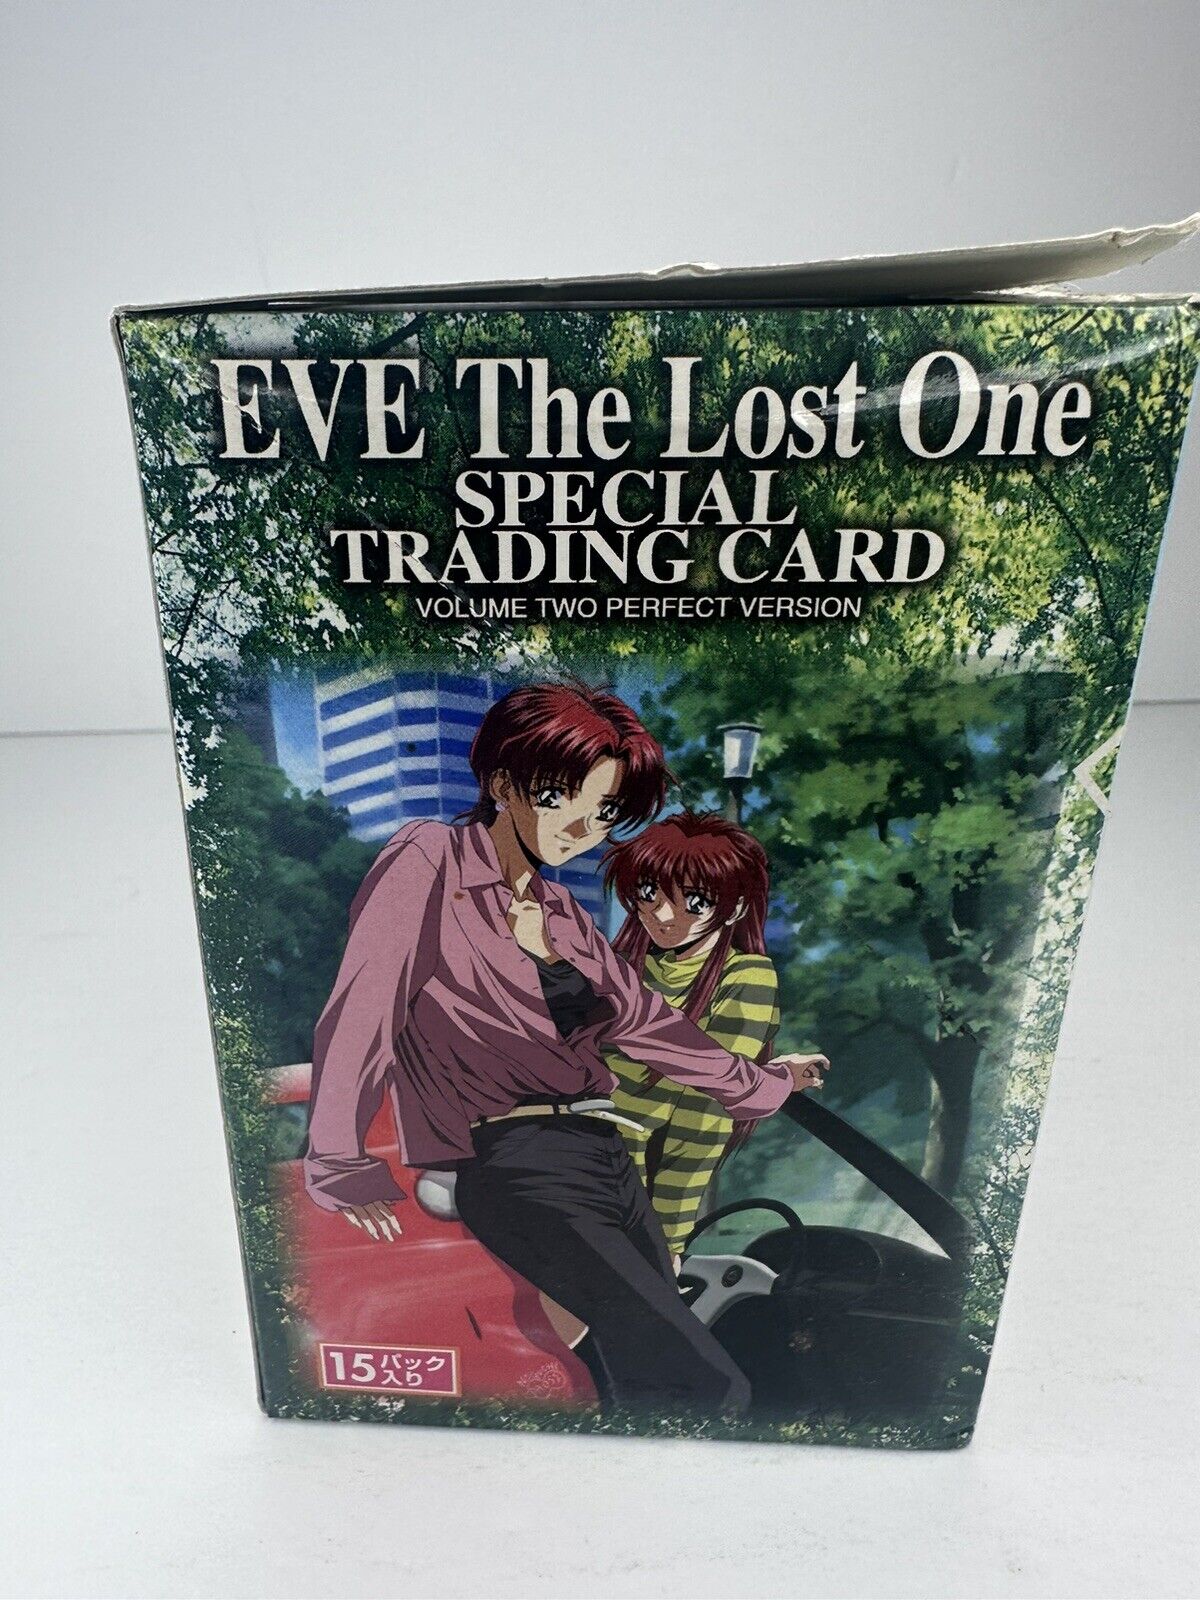 Rare Sealed 1998 EVE The Last One Vol 2 Anime Trading Cards - Vintage Japanese Collectible - TreasuTiques